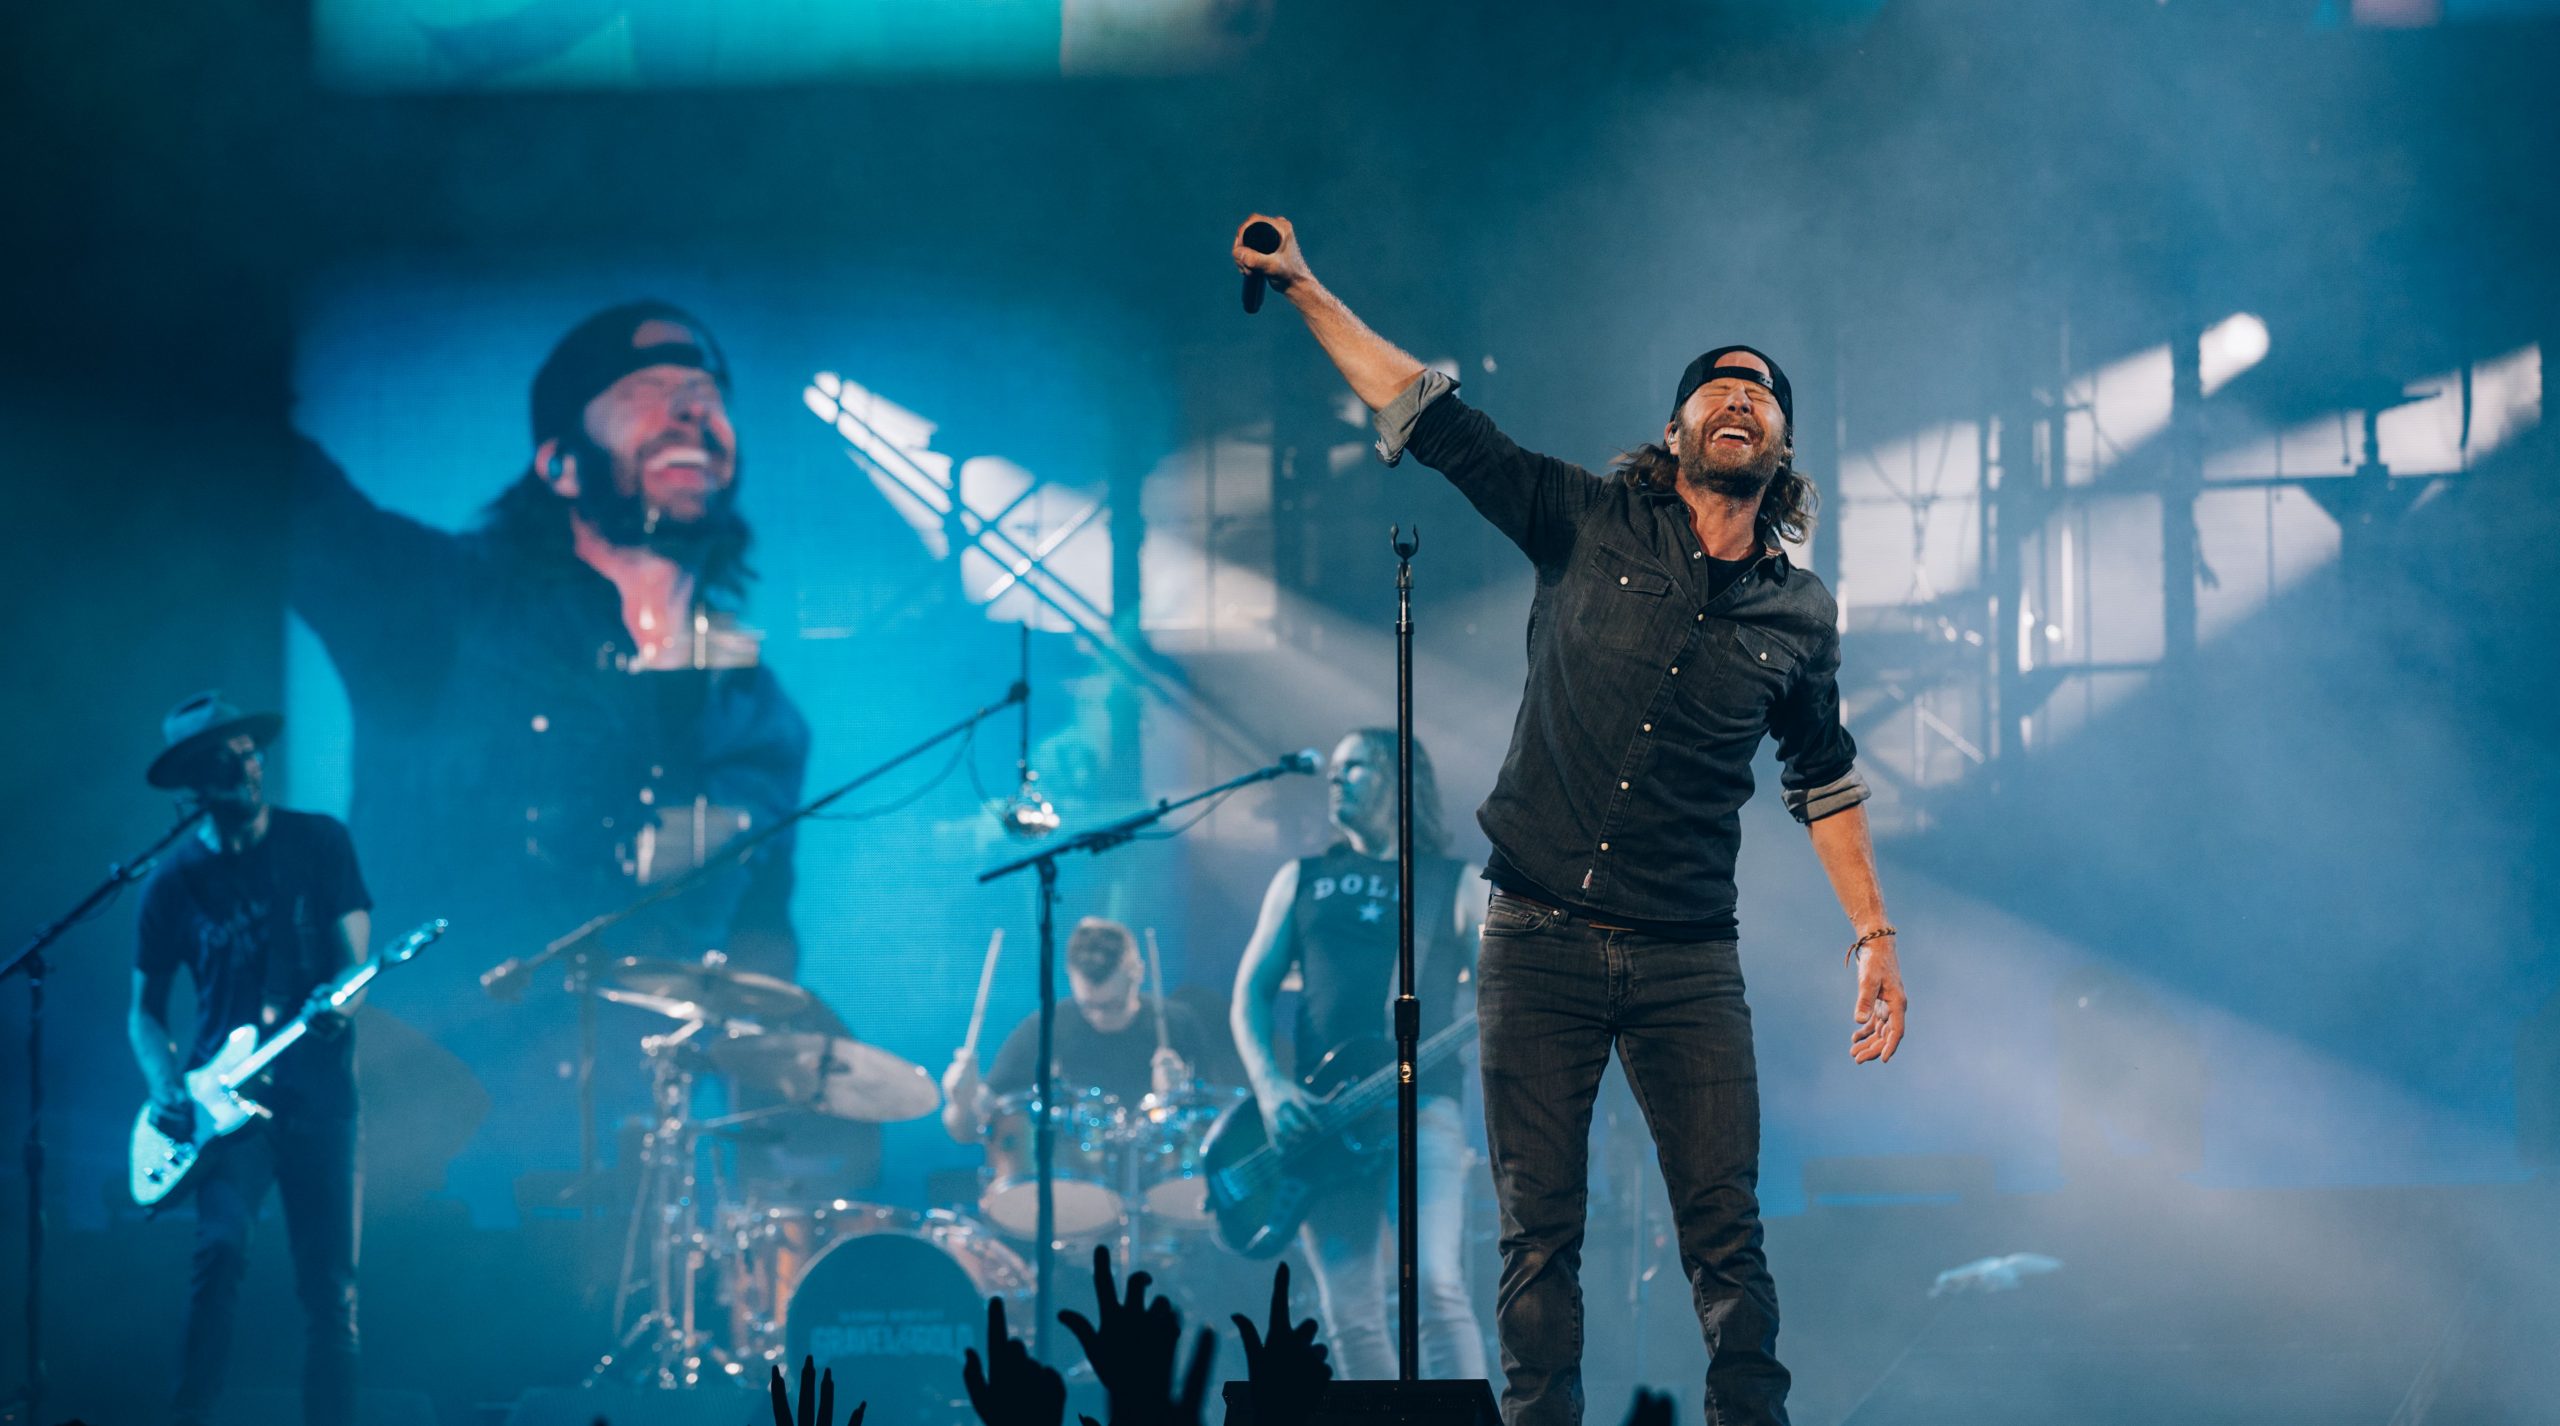 “CAPTIVATING PERFORMER” DIERKS BENTLEY HITS THE ROAD ON GRAVEL & GOLD TOUR WITH SOLD OUT FIRST WEEKEND